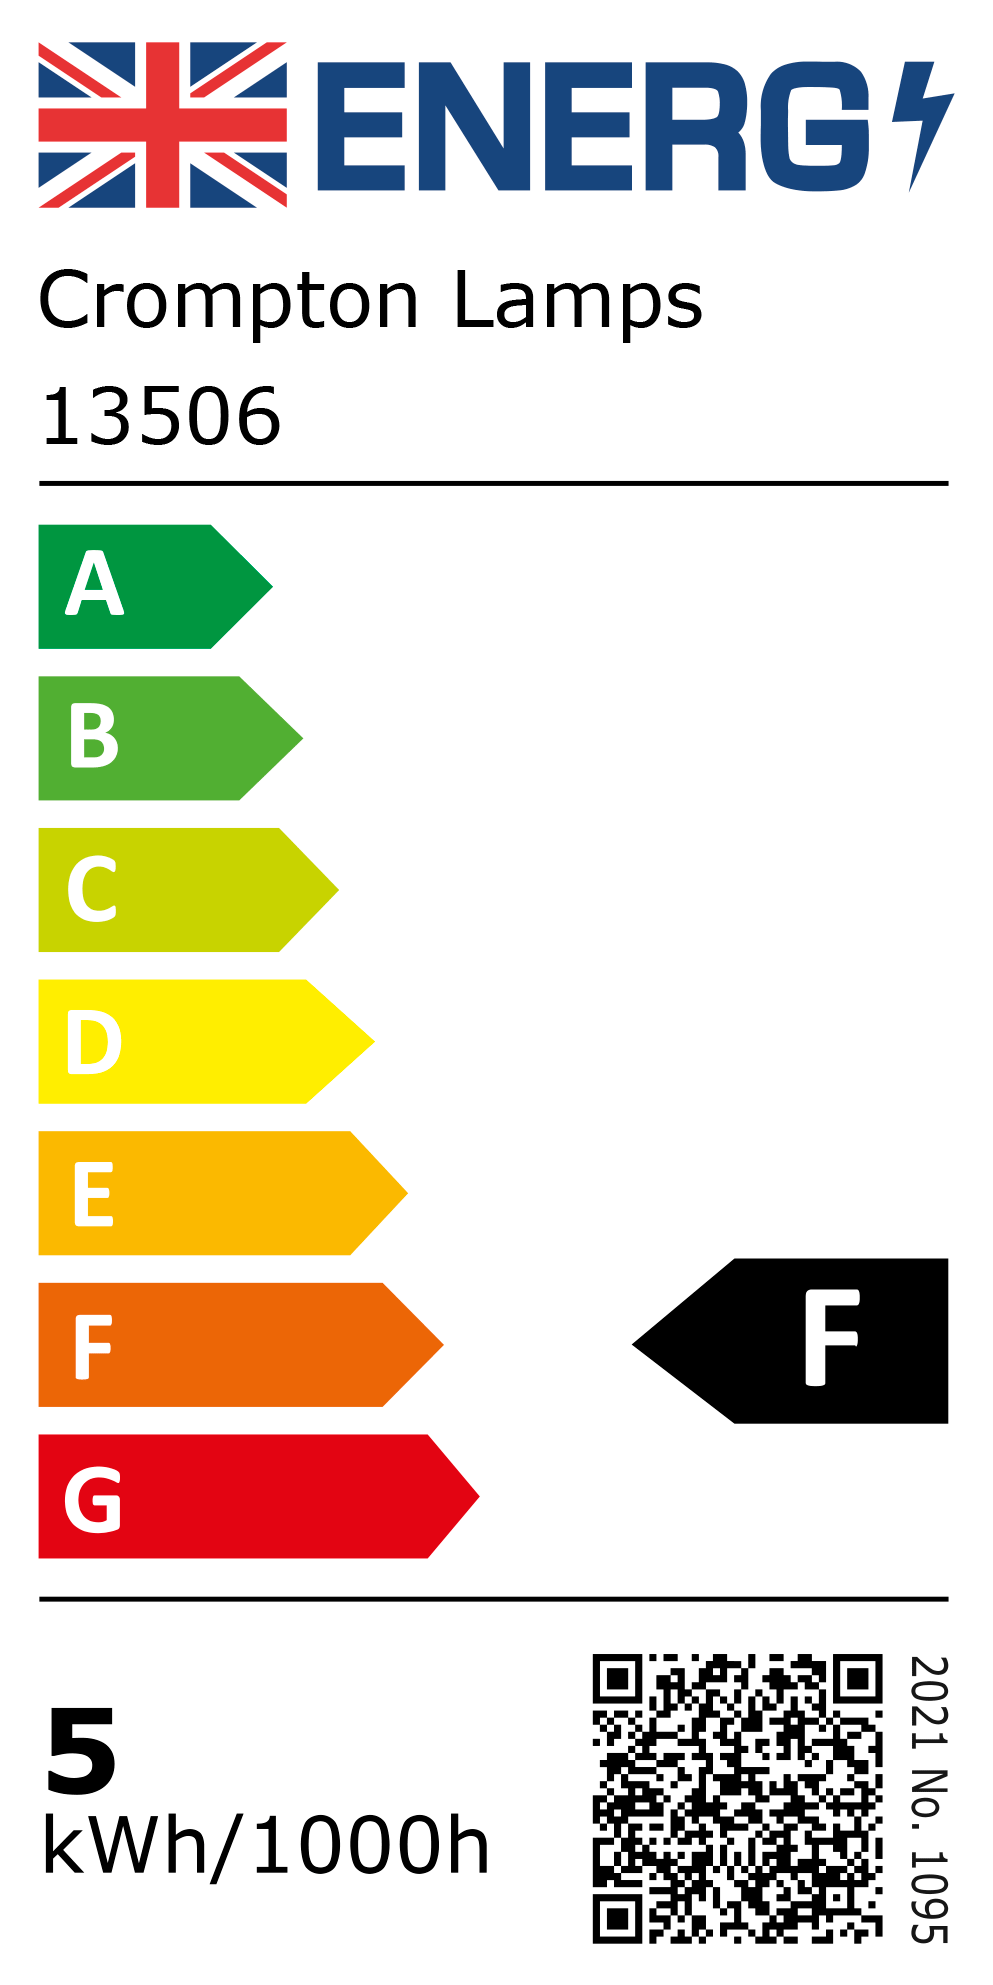 New 2021 Energy Rating Label: Stock Code 13506